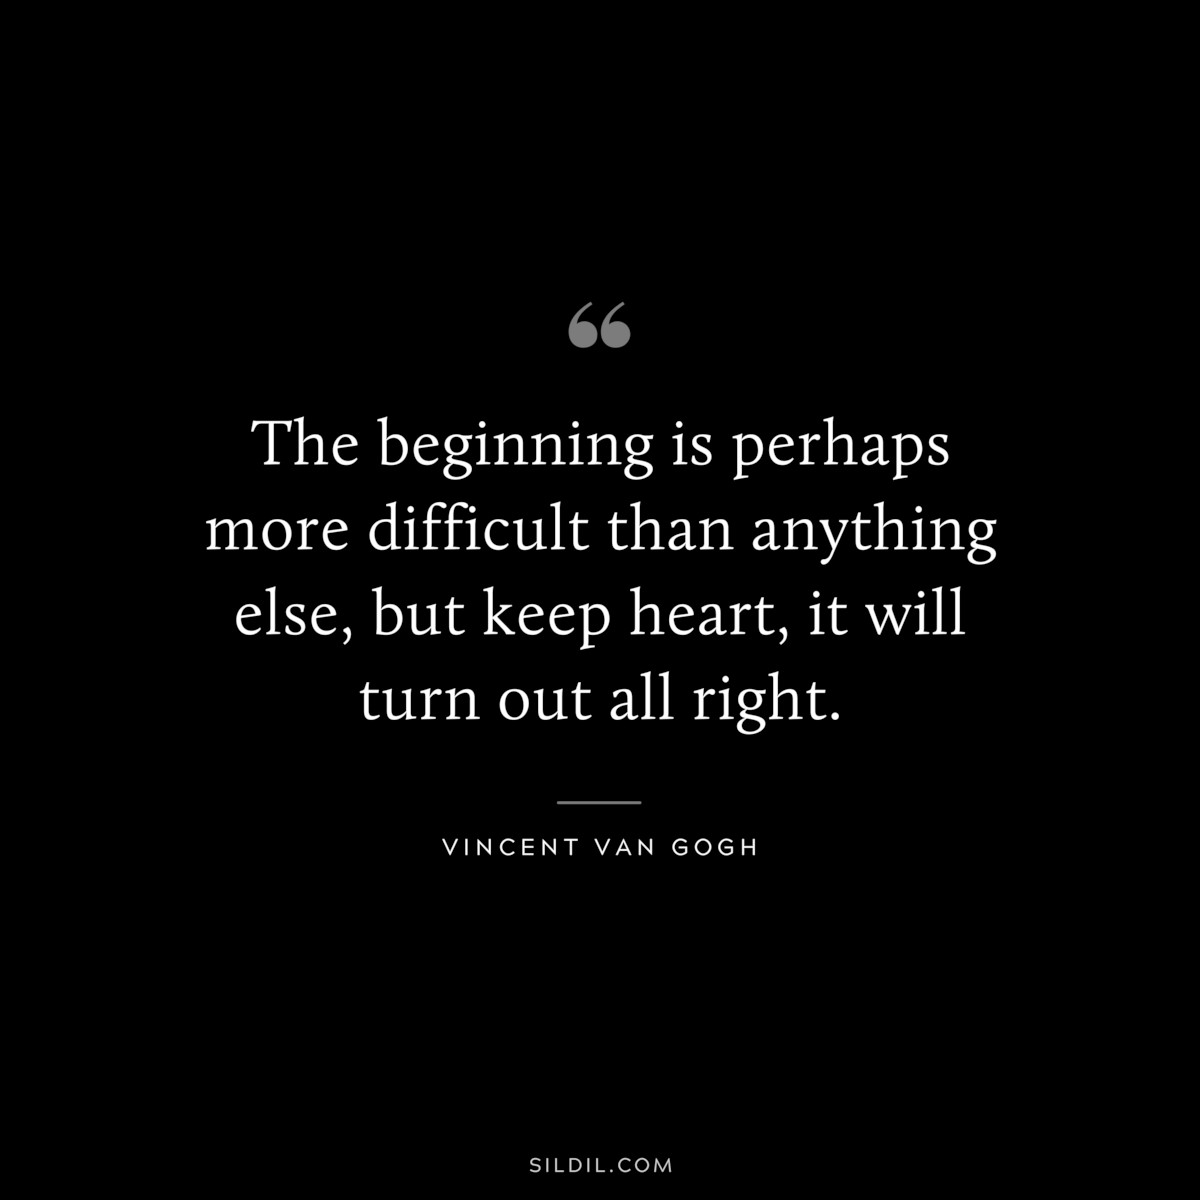 The beginning is perhaps more difficult than anything else, but keep heart, it will turn out all right. ― Vincent van Gogh